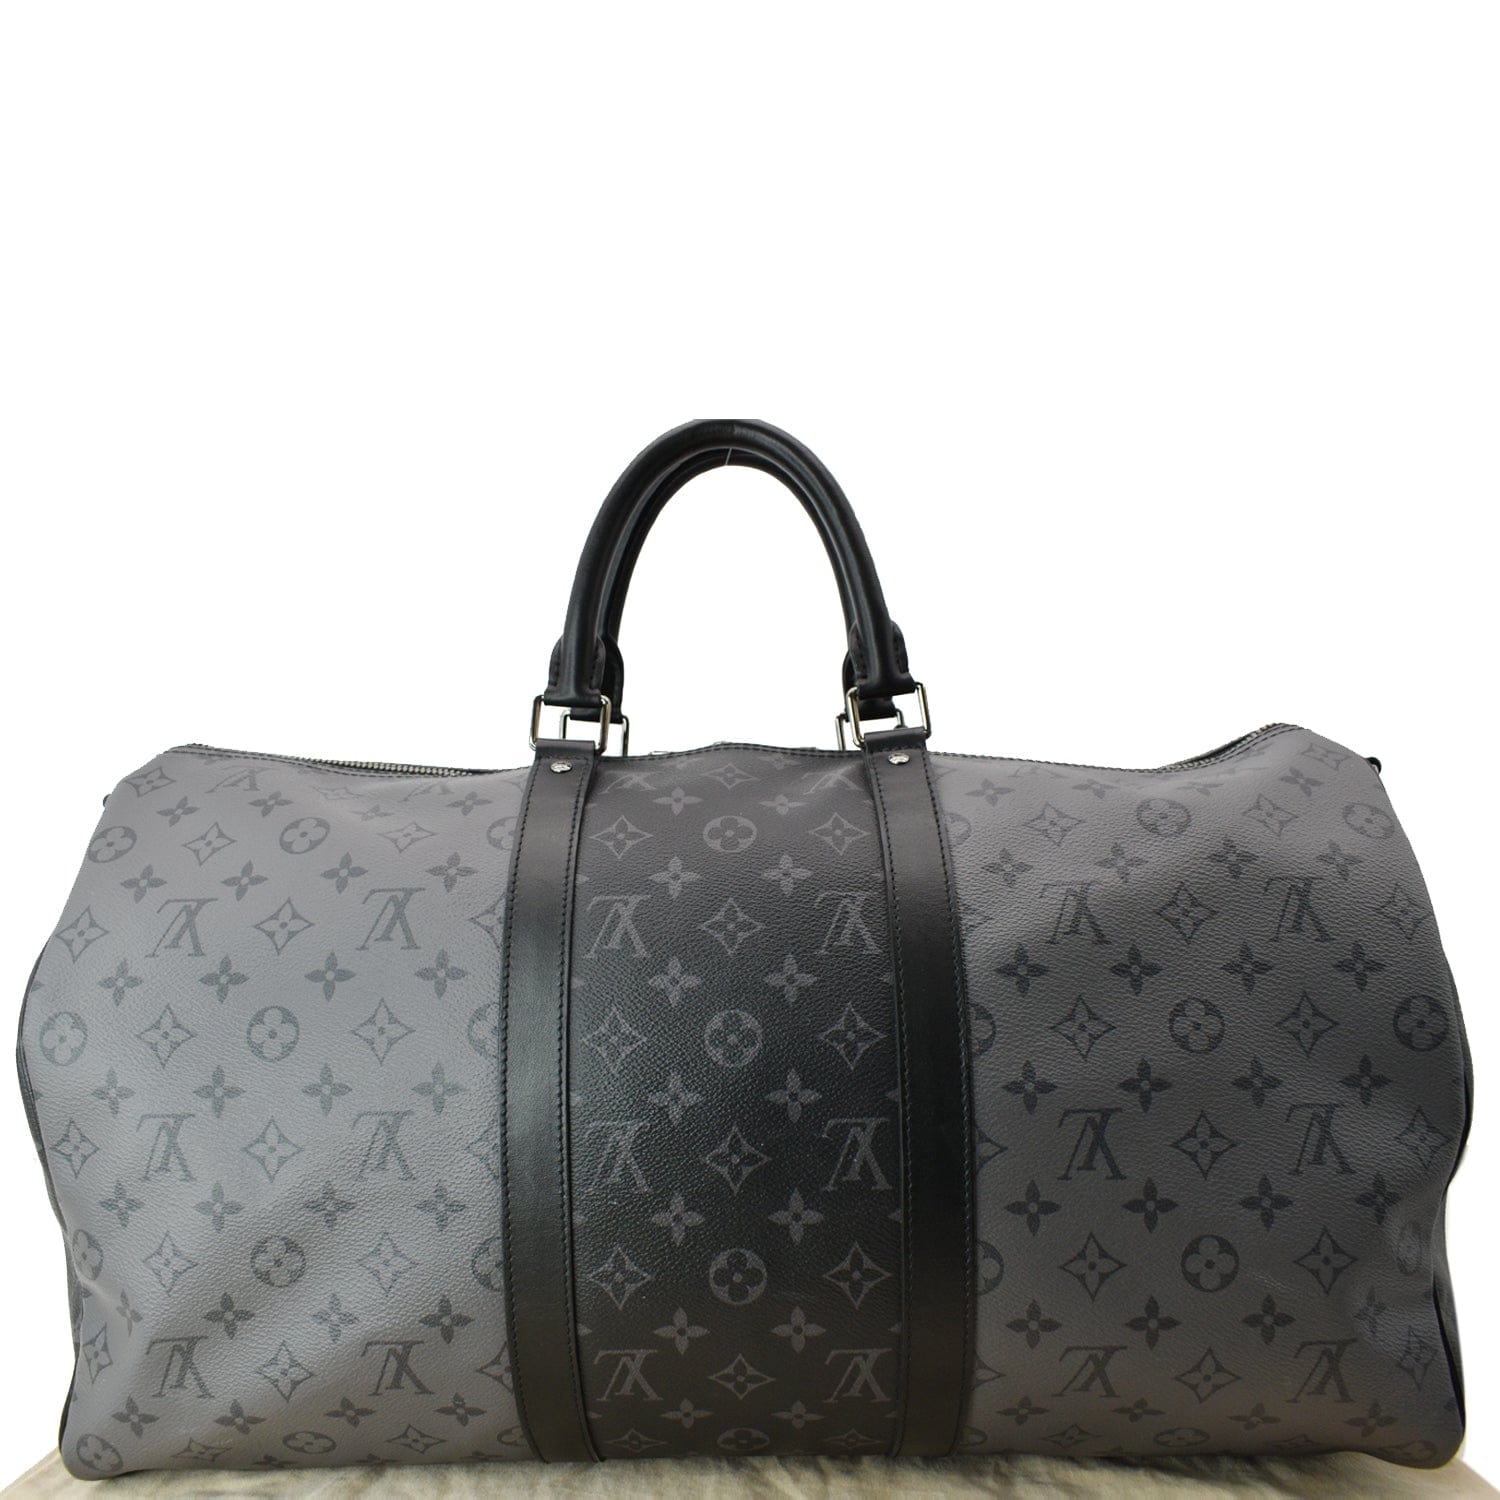 Louis Vuitton Monogram See Through Keepall 50 Bag Reference Guide